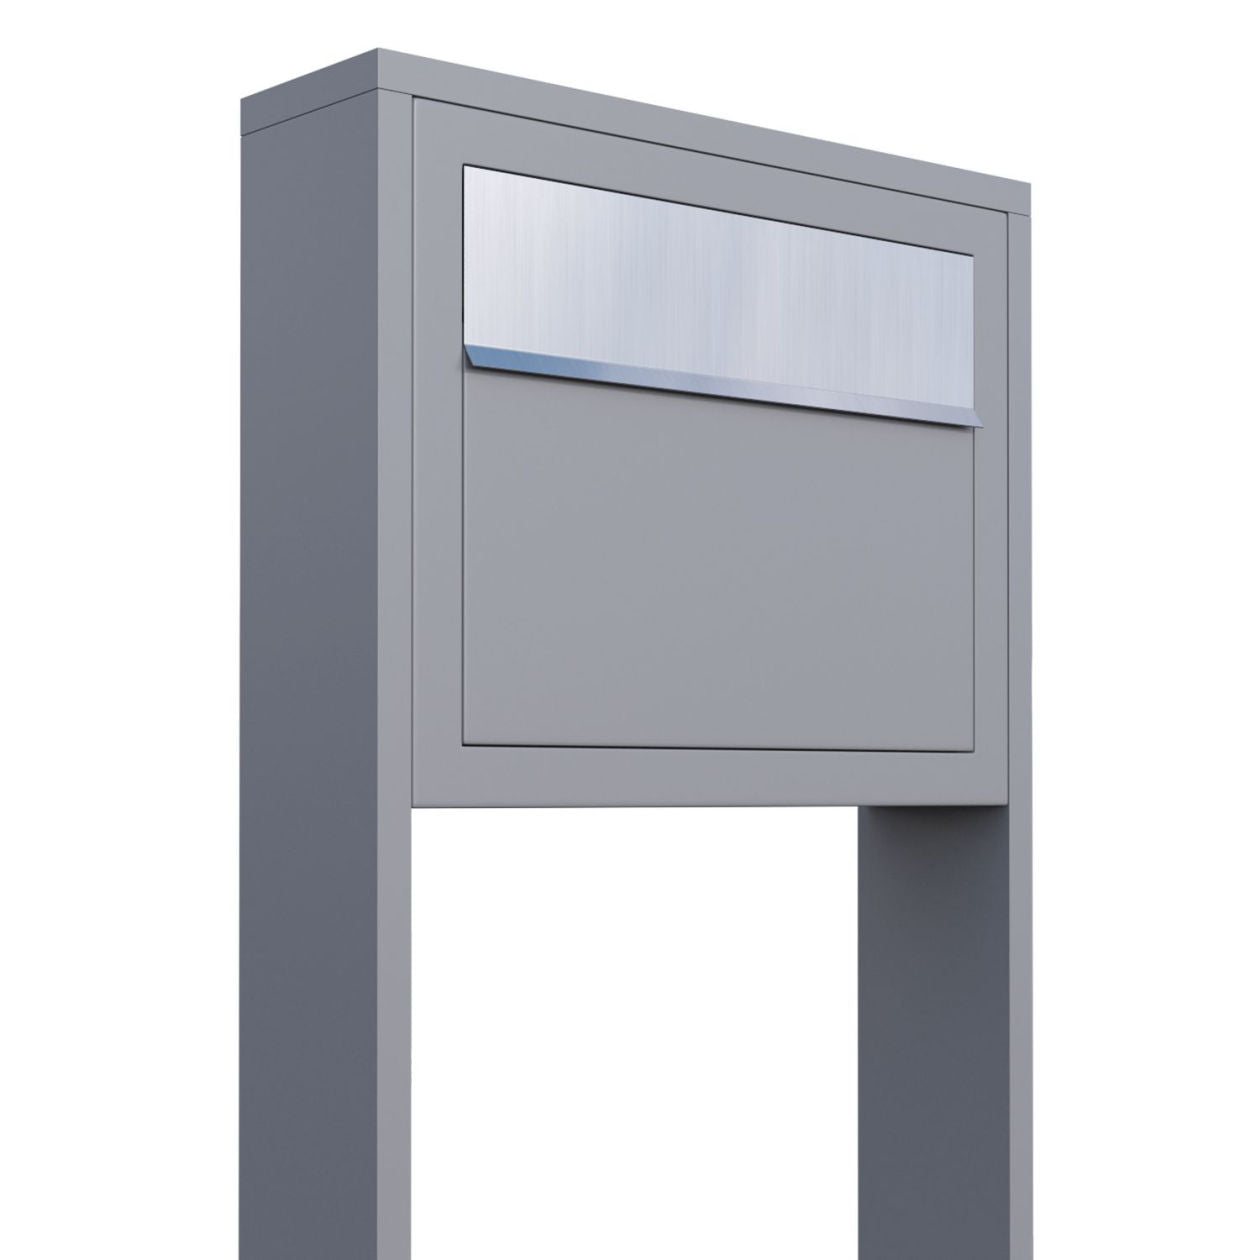 STAND ELEGANCE by Bravios - Modern post-mounted gray mailbox with stainless steel flap